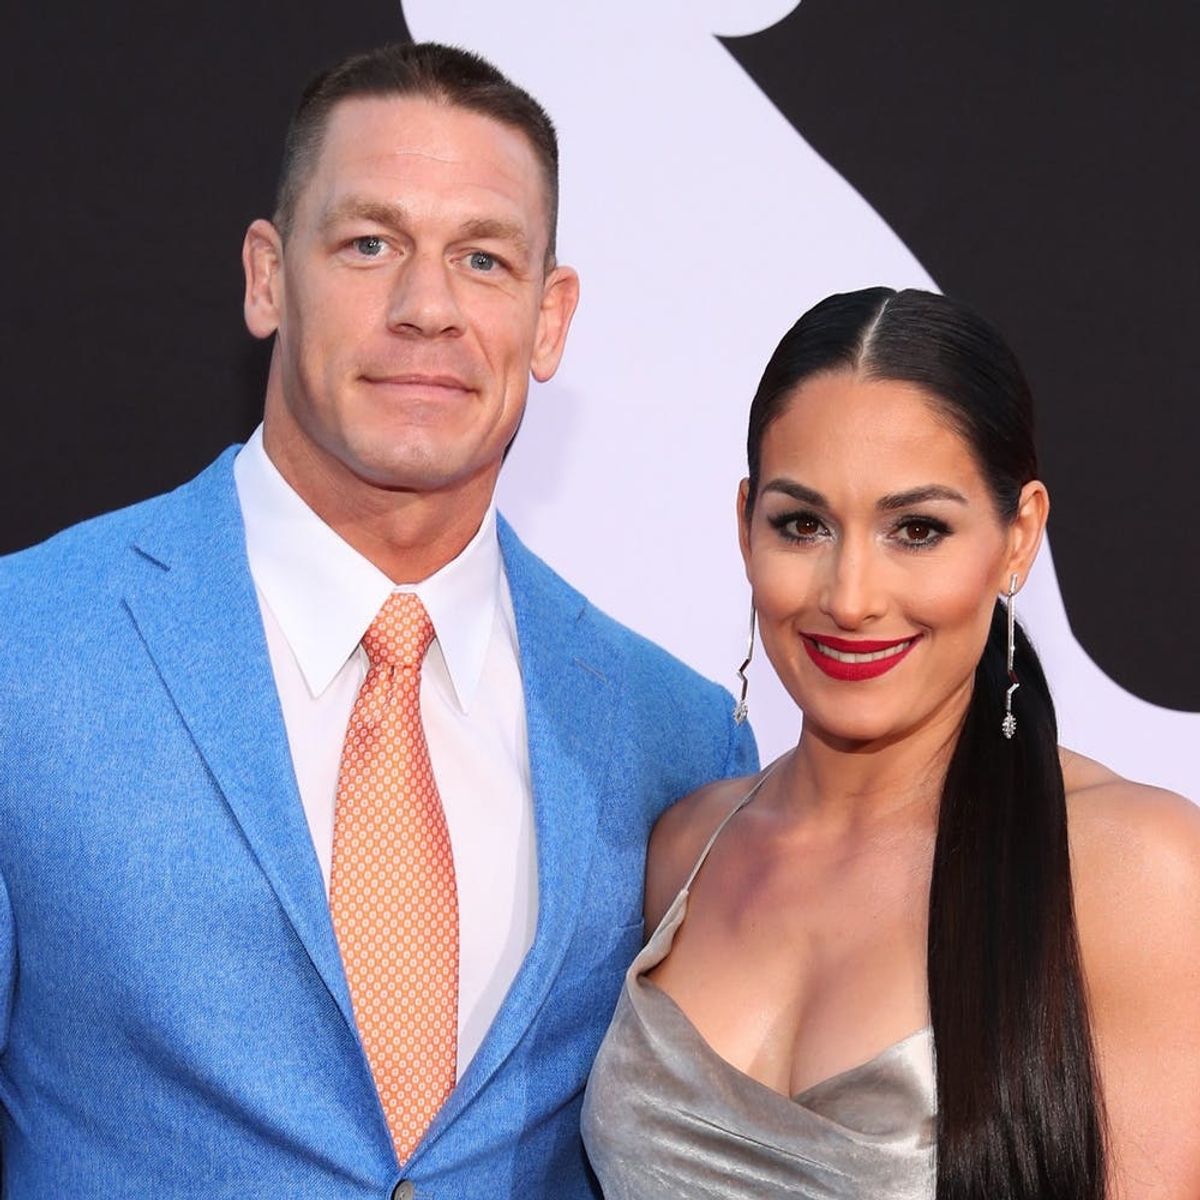 John Cena and Nikki Bella Both Say They Hope to Get Back Together